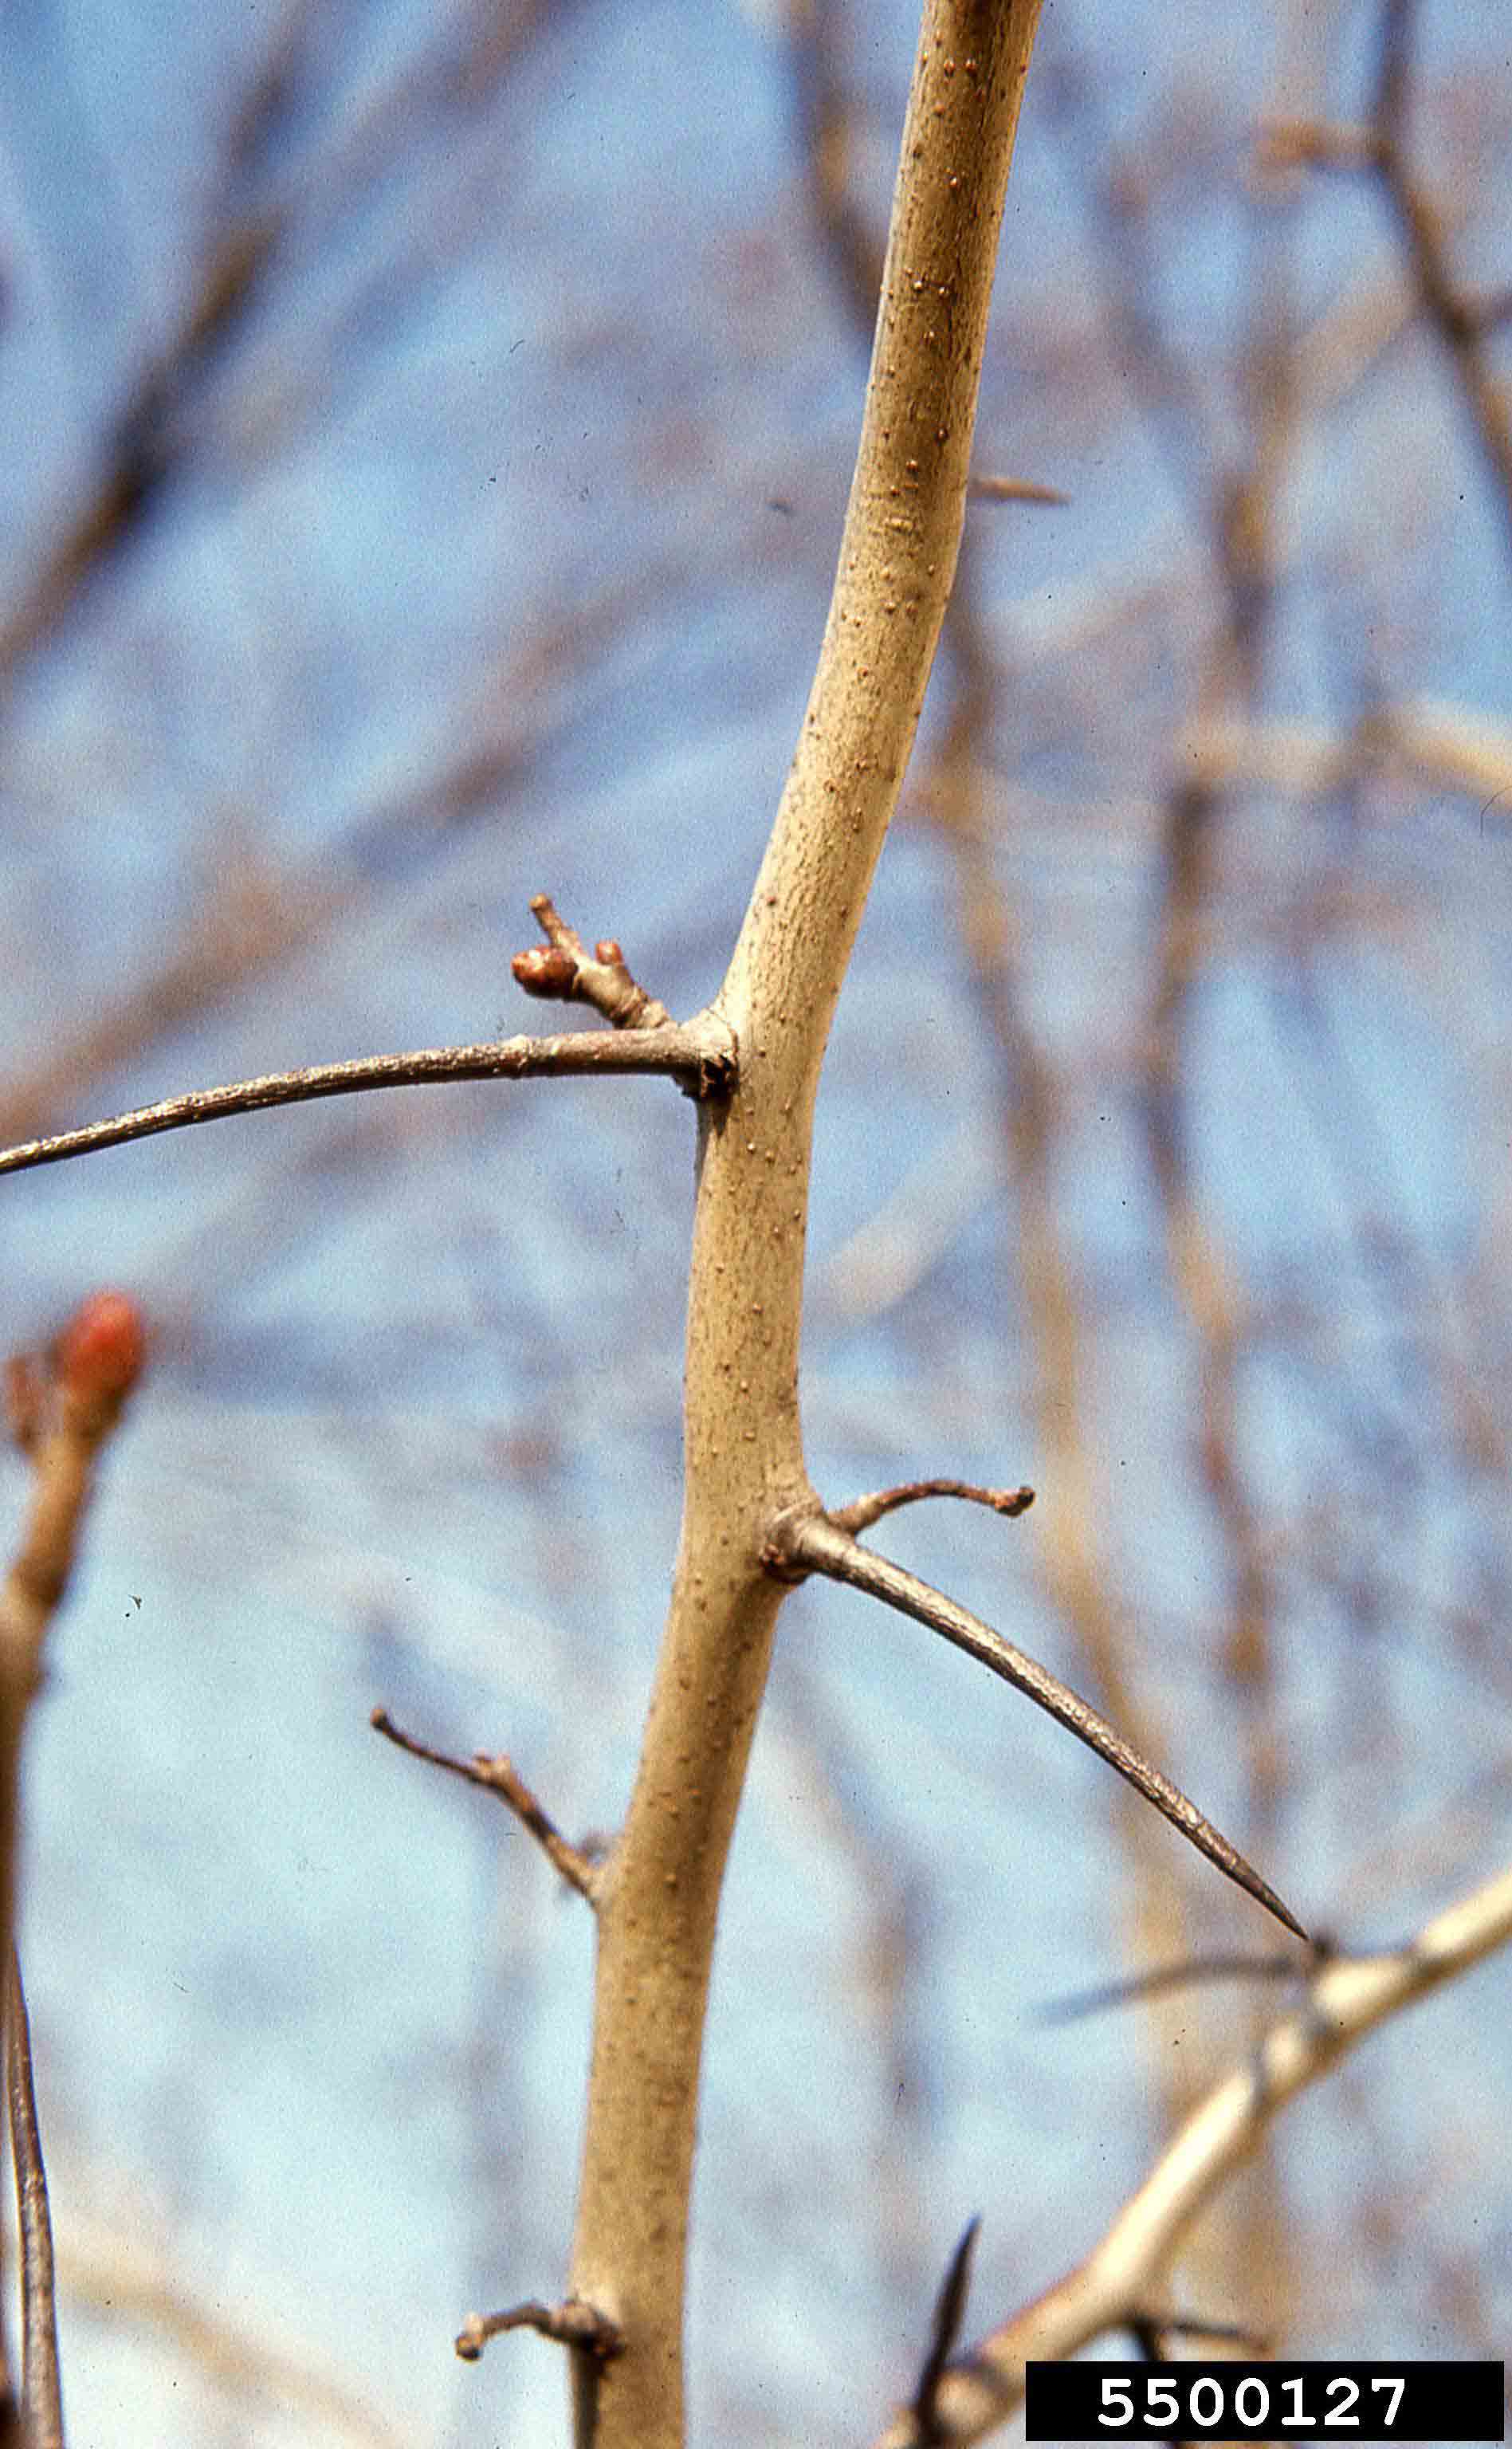 Cockspur hawthorn branch with long thorns